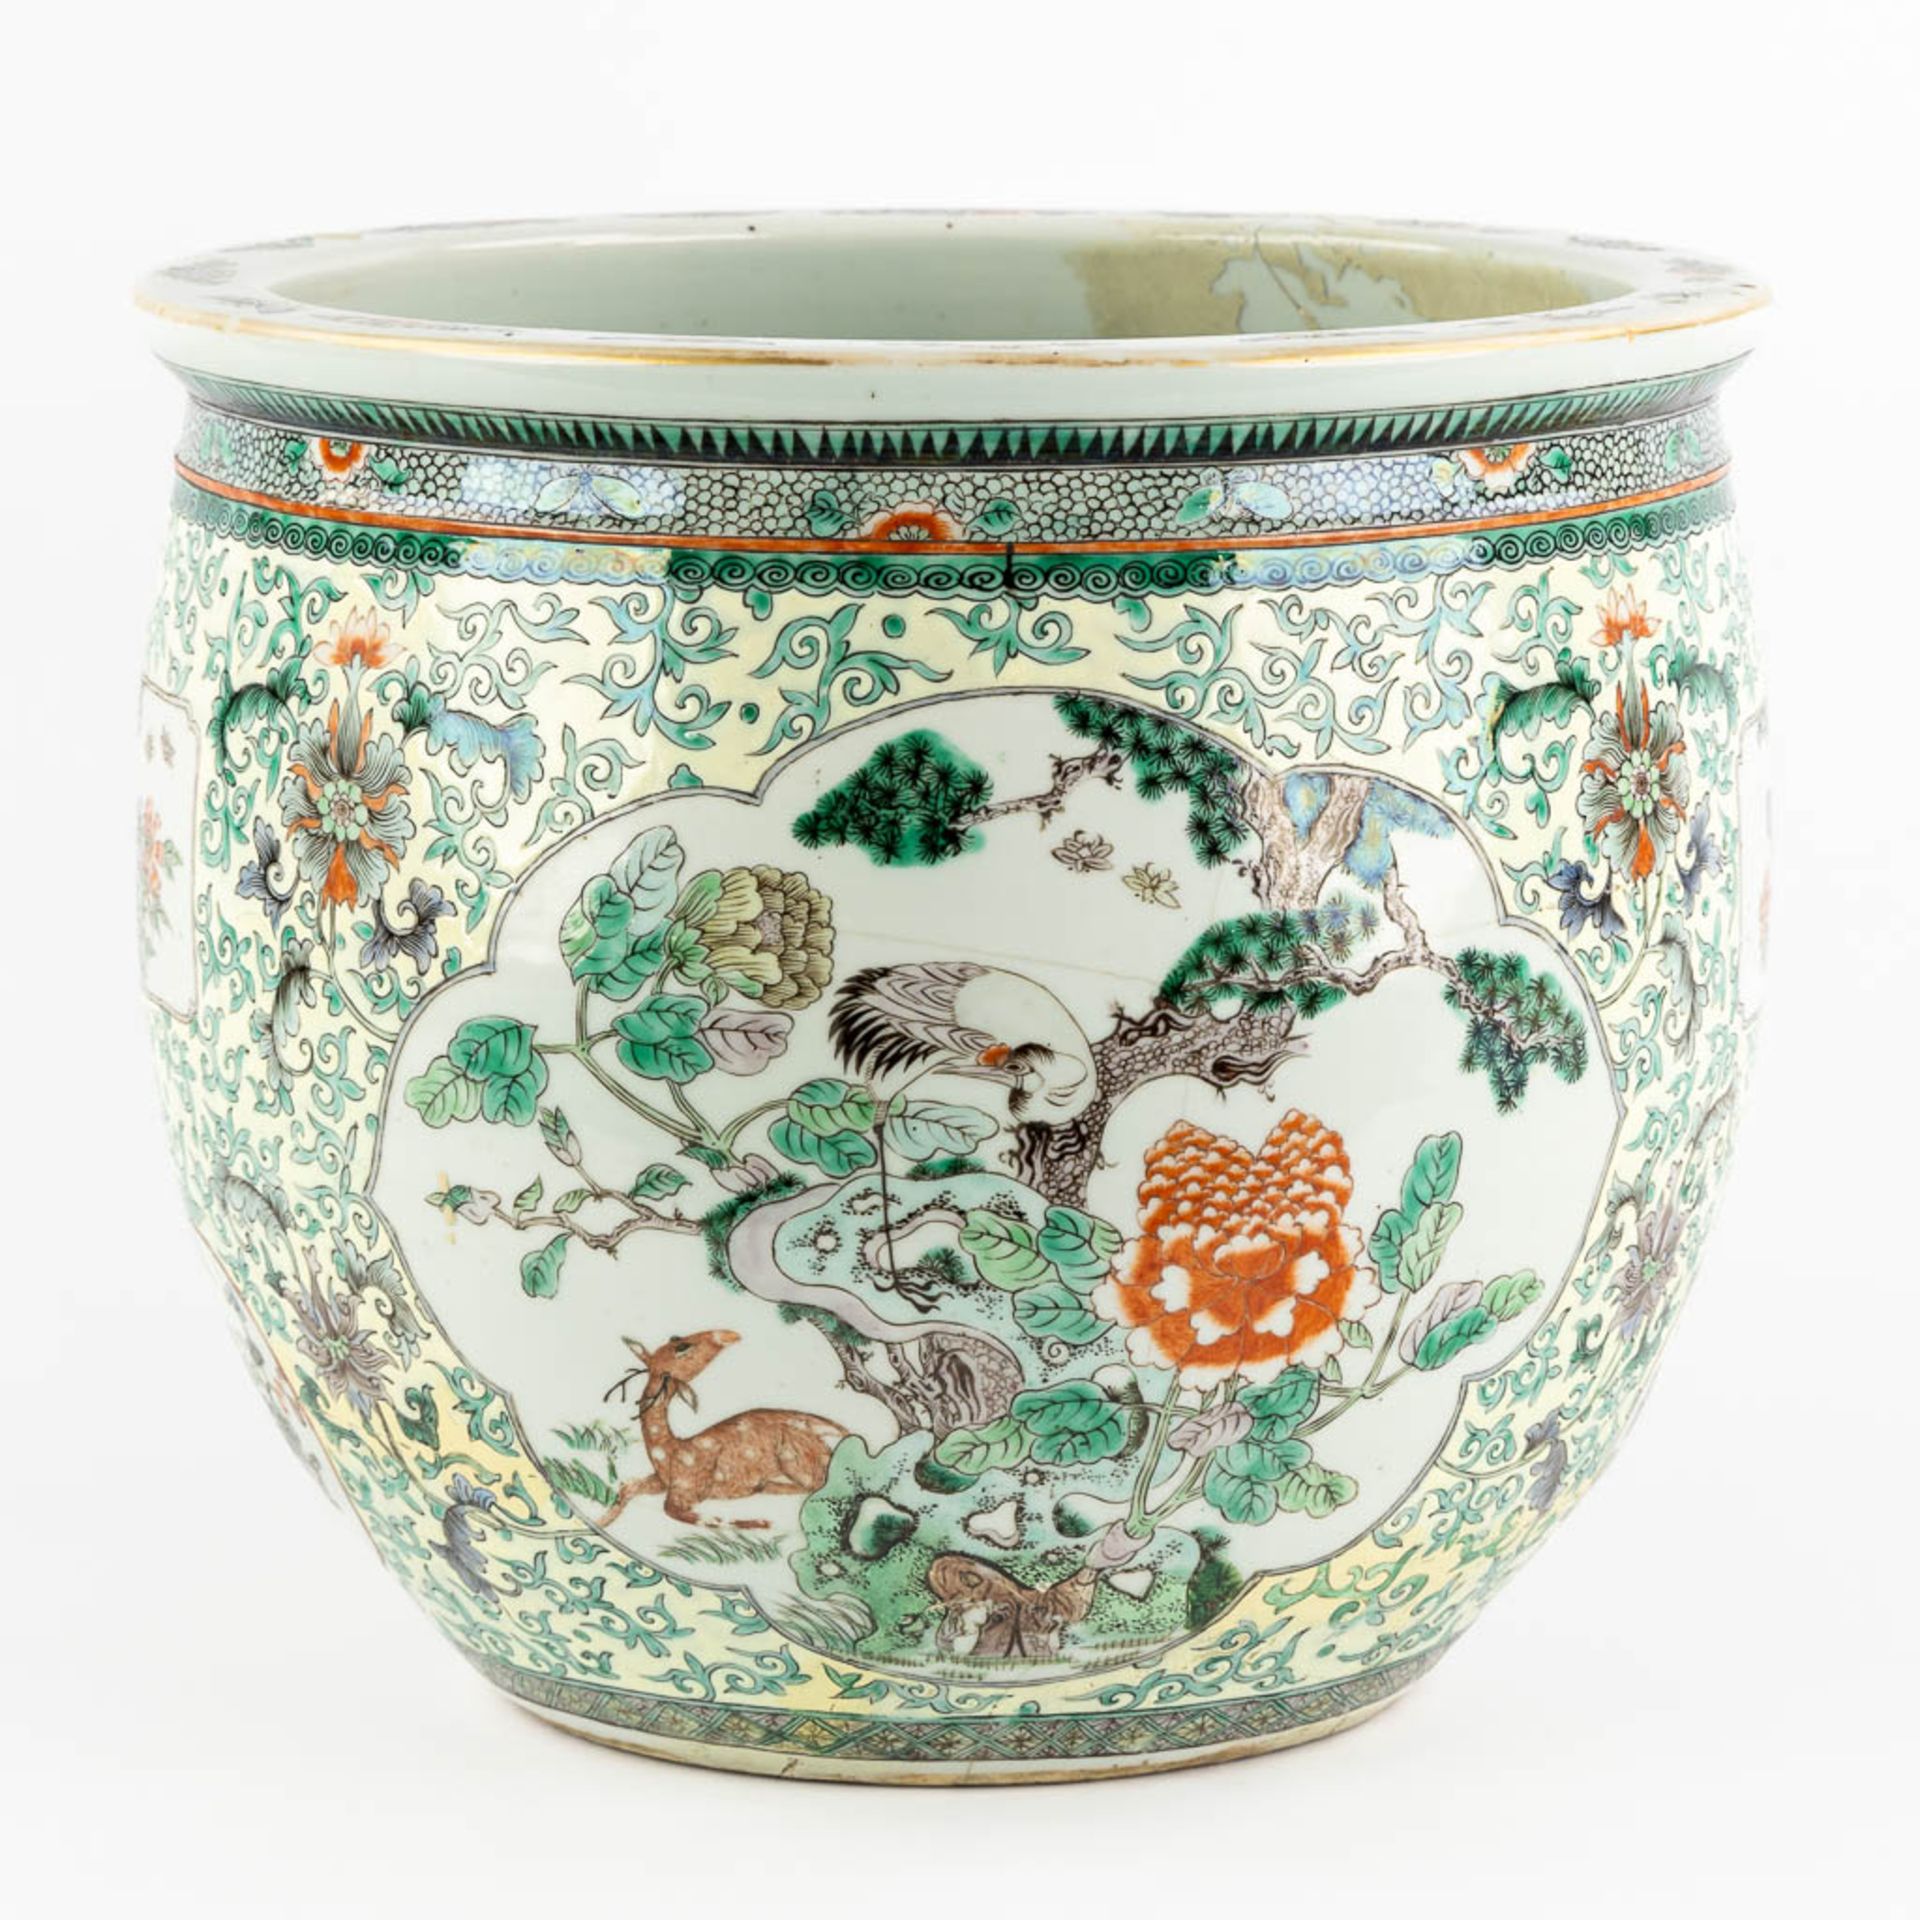 A Large Chinese Cache-Pot, Famille Verte decorated with fauna and flora. 19th C. (H:35 x D:40 cm) - Bild 6 aus 14